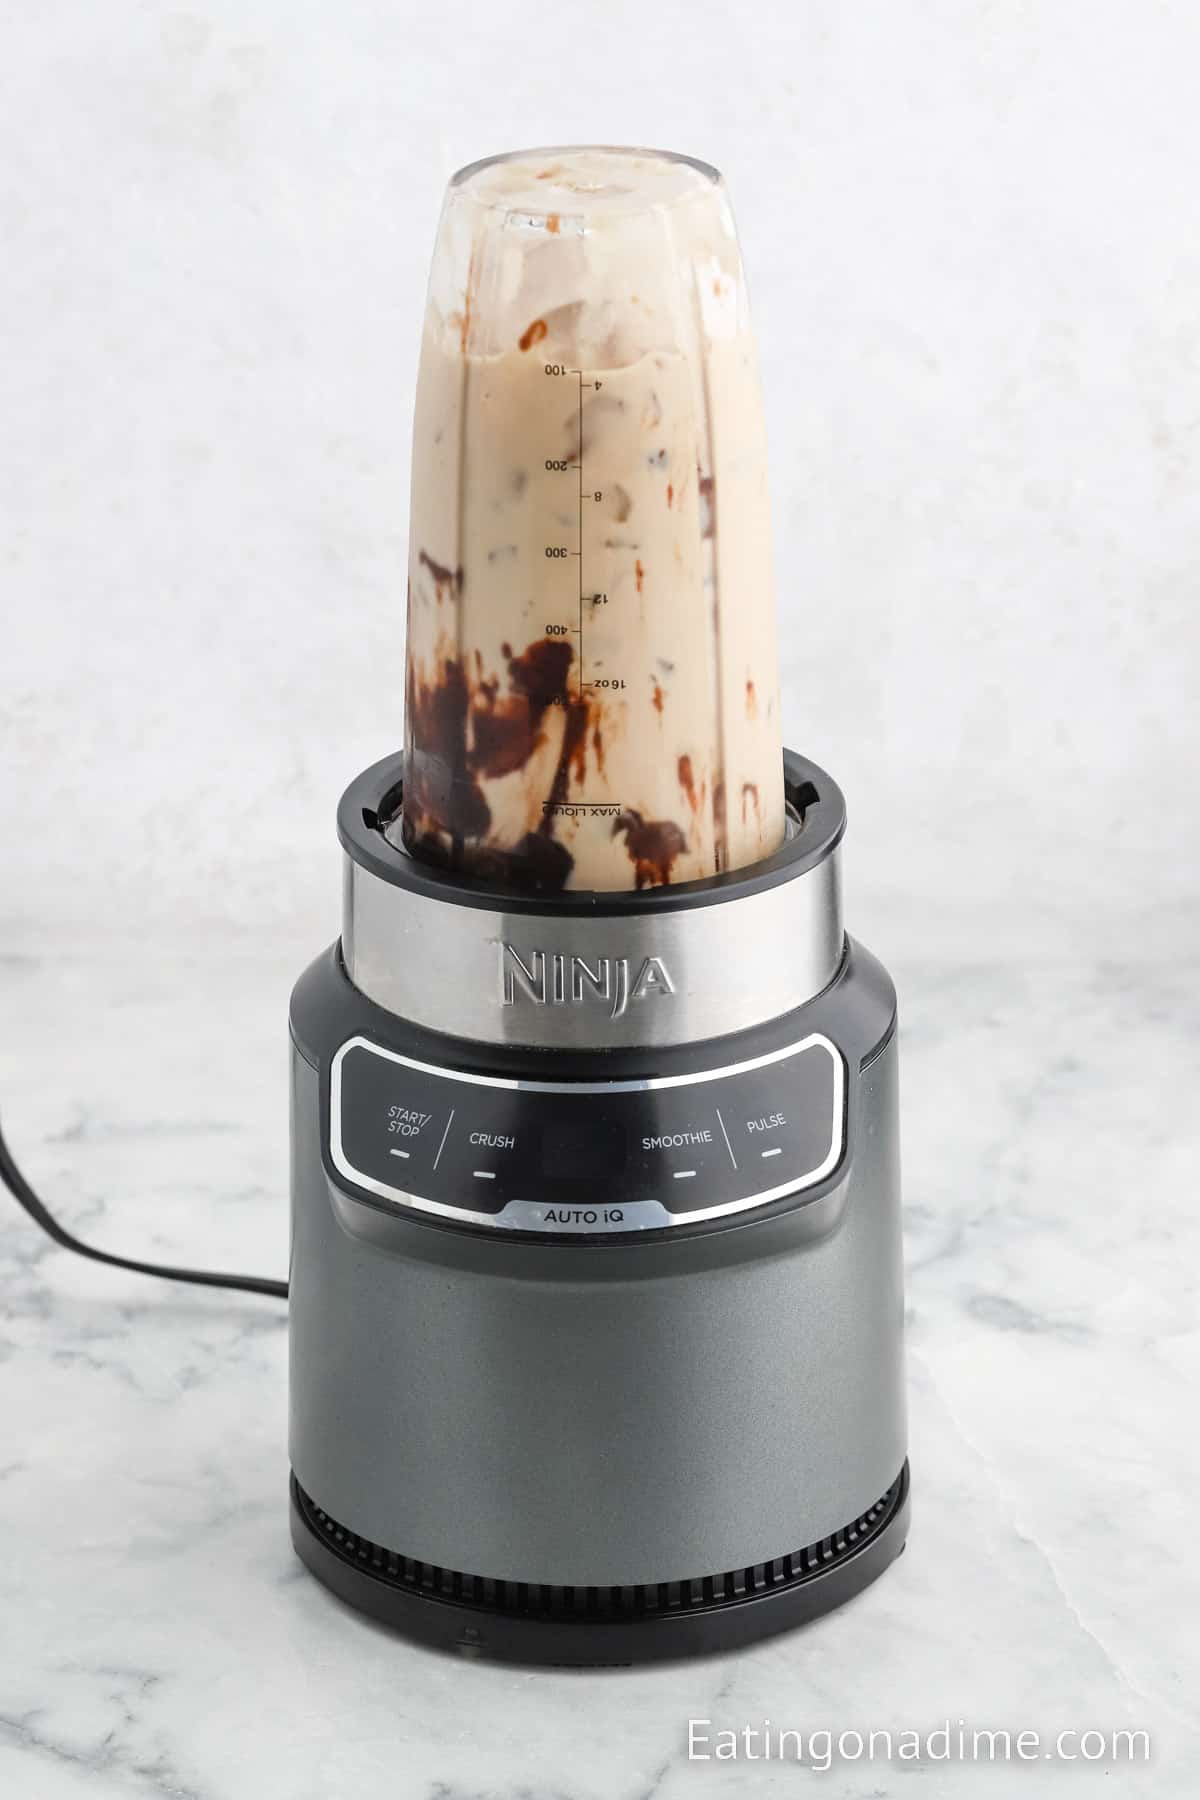 Blending the Frappuccino ingredients in a blender